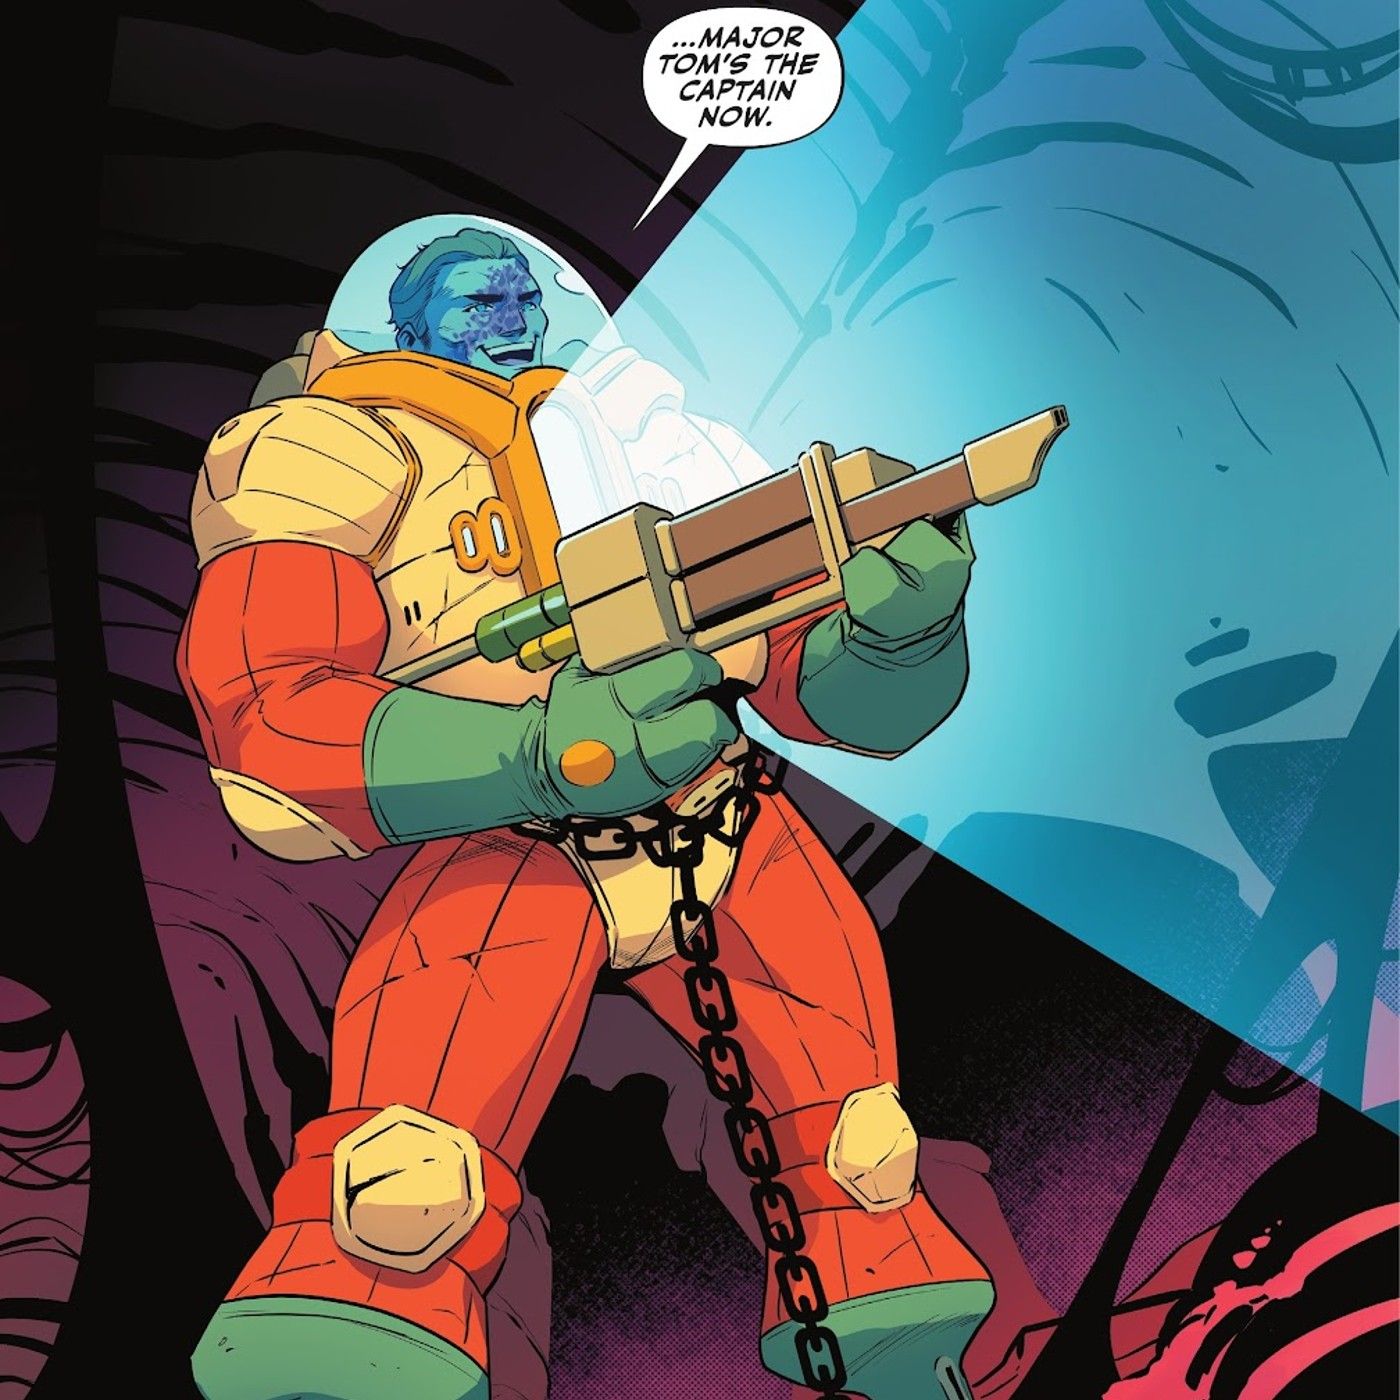 Comic book panel: a new character named Major Tom appears in a red and yellow space suit holding a weapon.